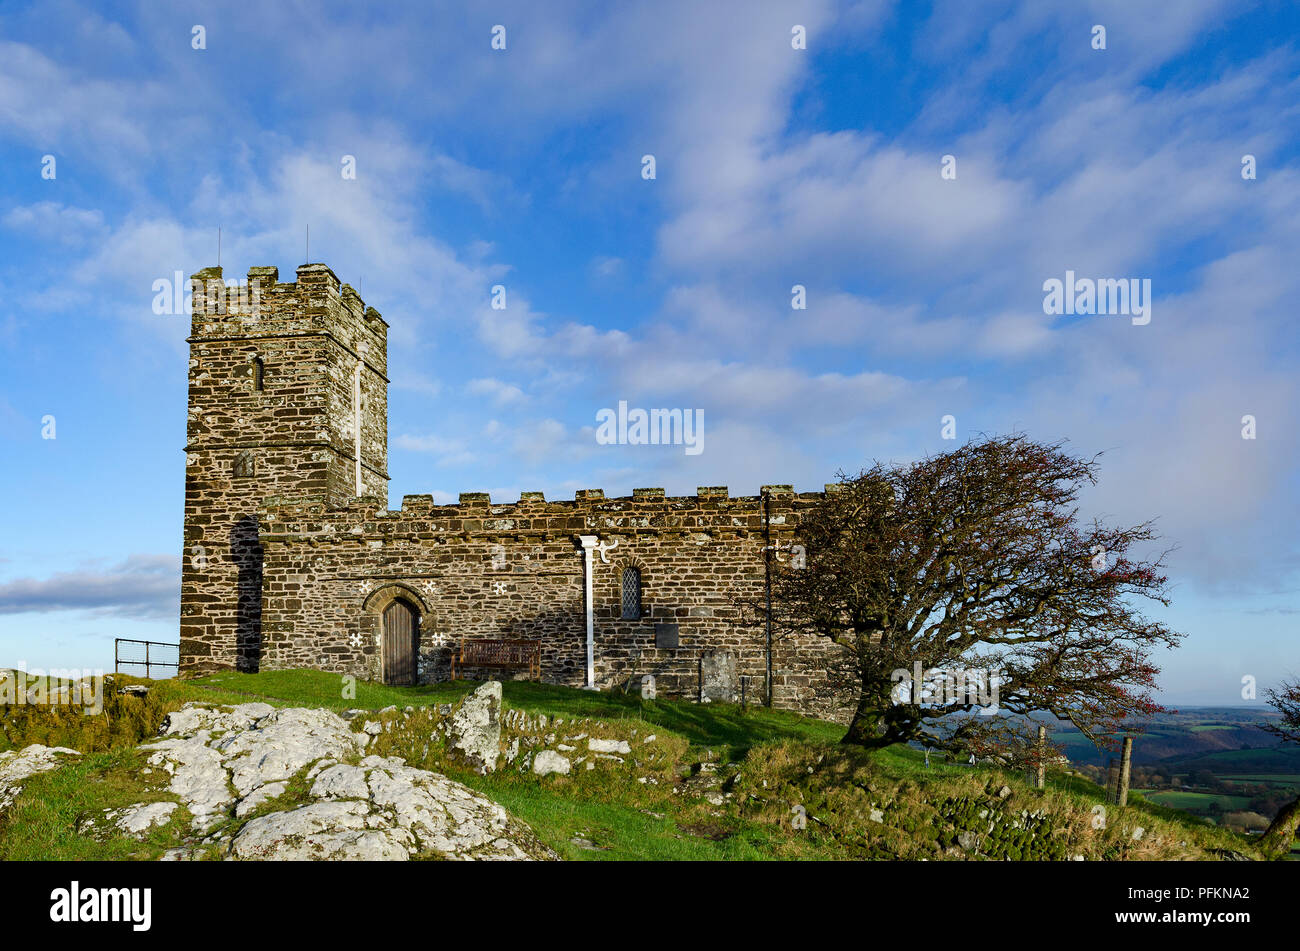 the church of st.michael de rupe on the summit of brent tor near the village of north brentor, dartmoor, devon, england, britain, uk. Stock Photo